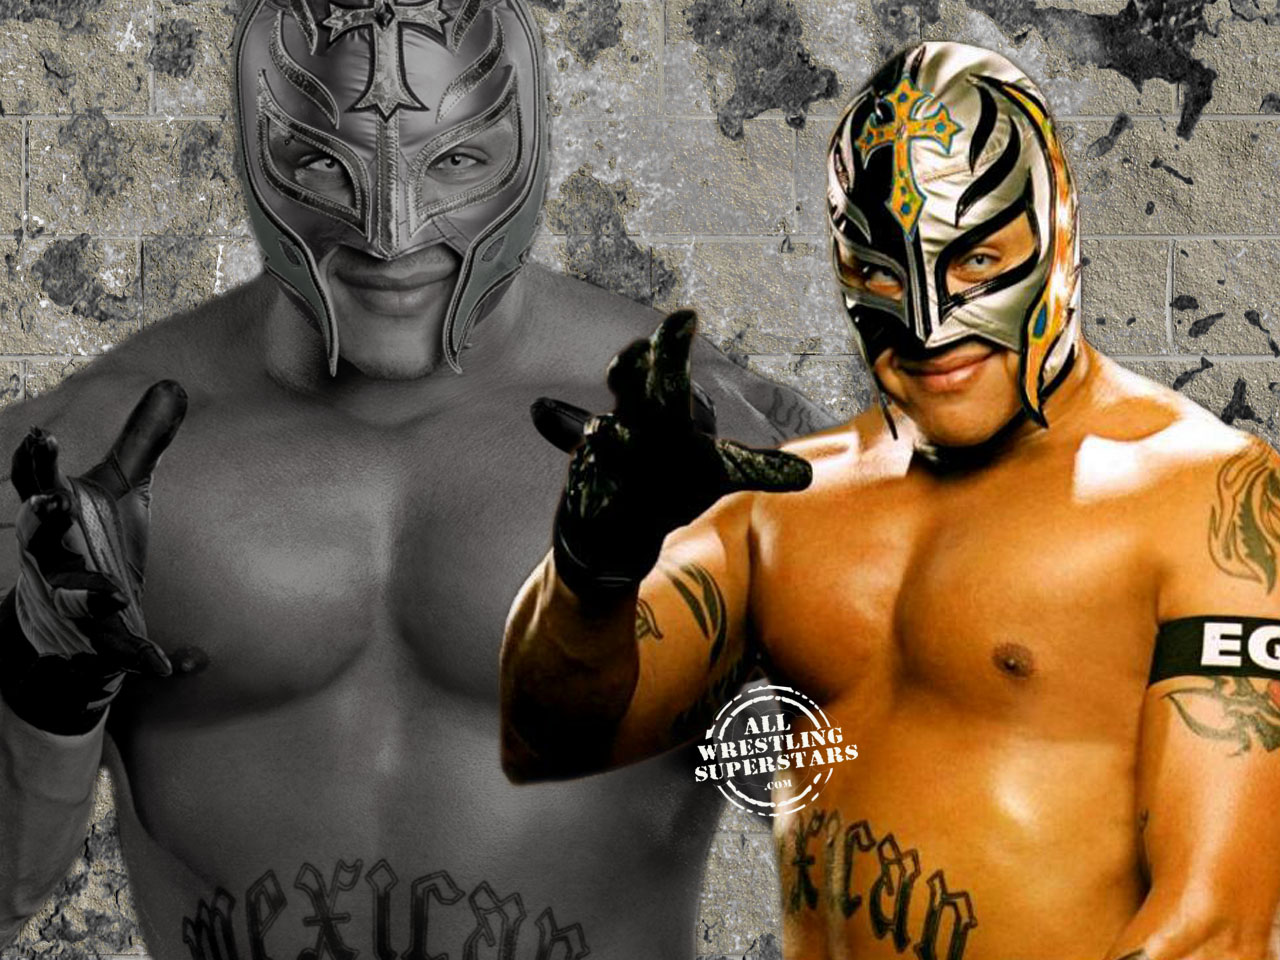 Mexican American Professional Wrestler Rey Mysterio In A Pose With His